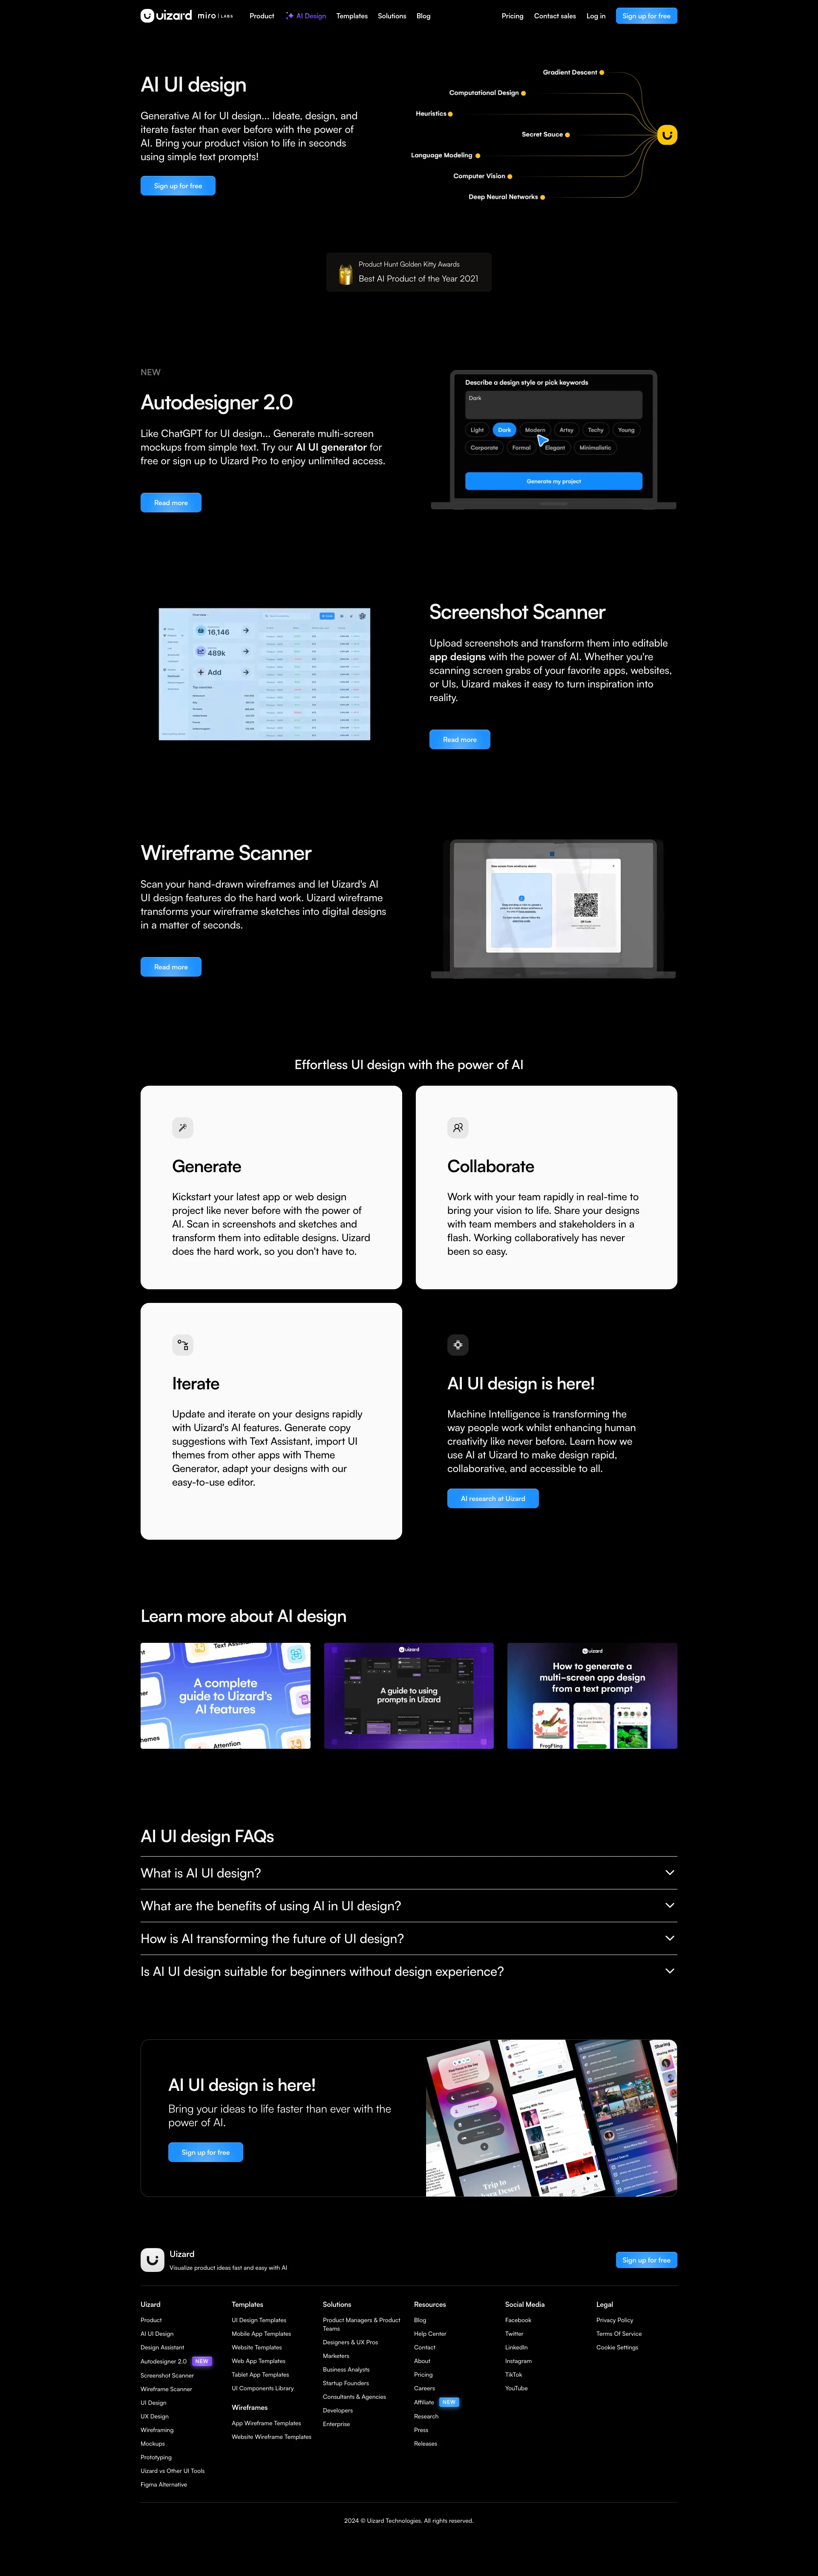 Uizard Landing Page Example: Turn product ideas into concepts instantly with GenAI. Visualize, communicate, and iterate on wireframes and prototypes in minutes. Empower your product team with AI!